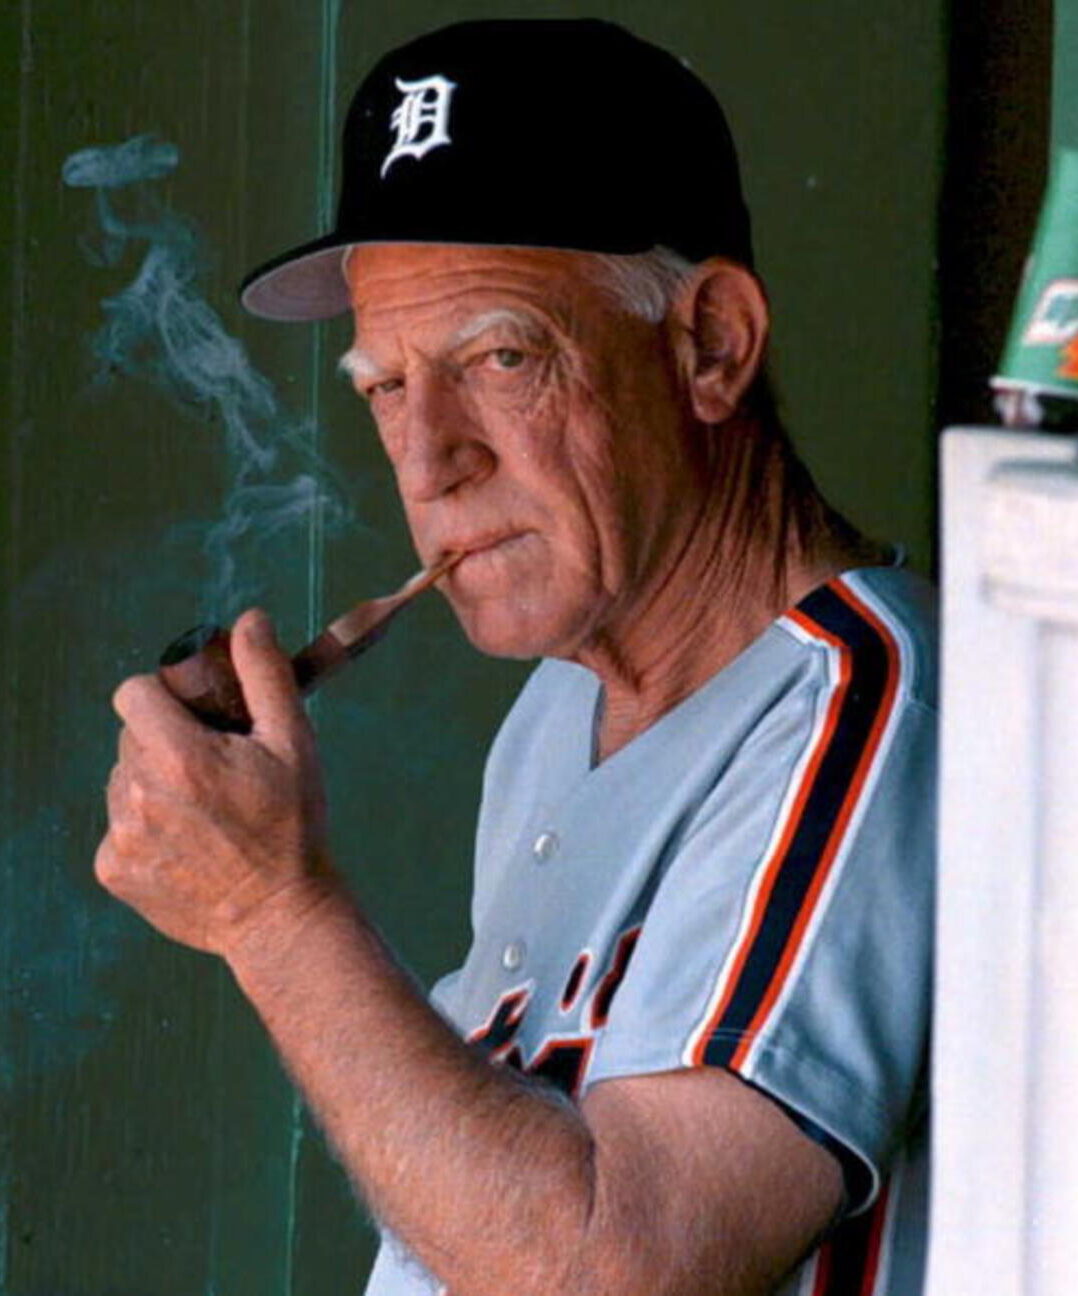 1970 Cincinnati Reds: Sparky Anderson takes over as manager